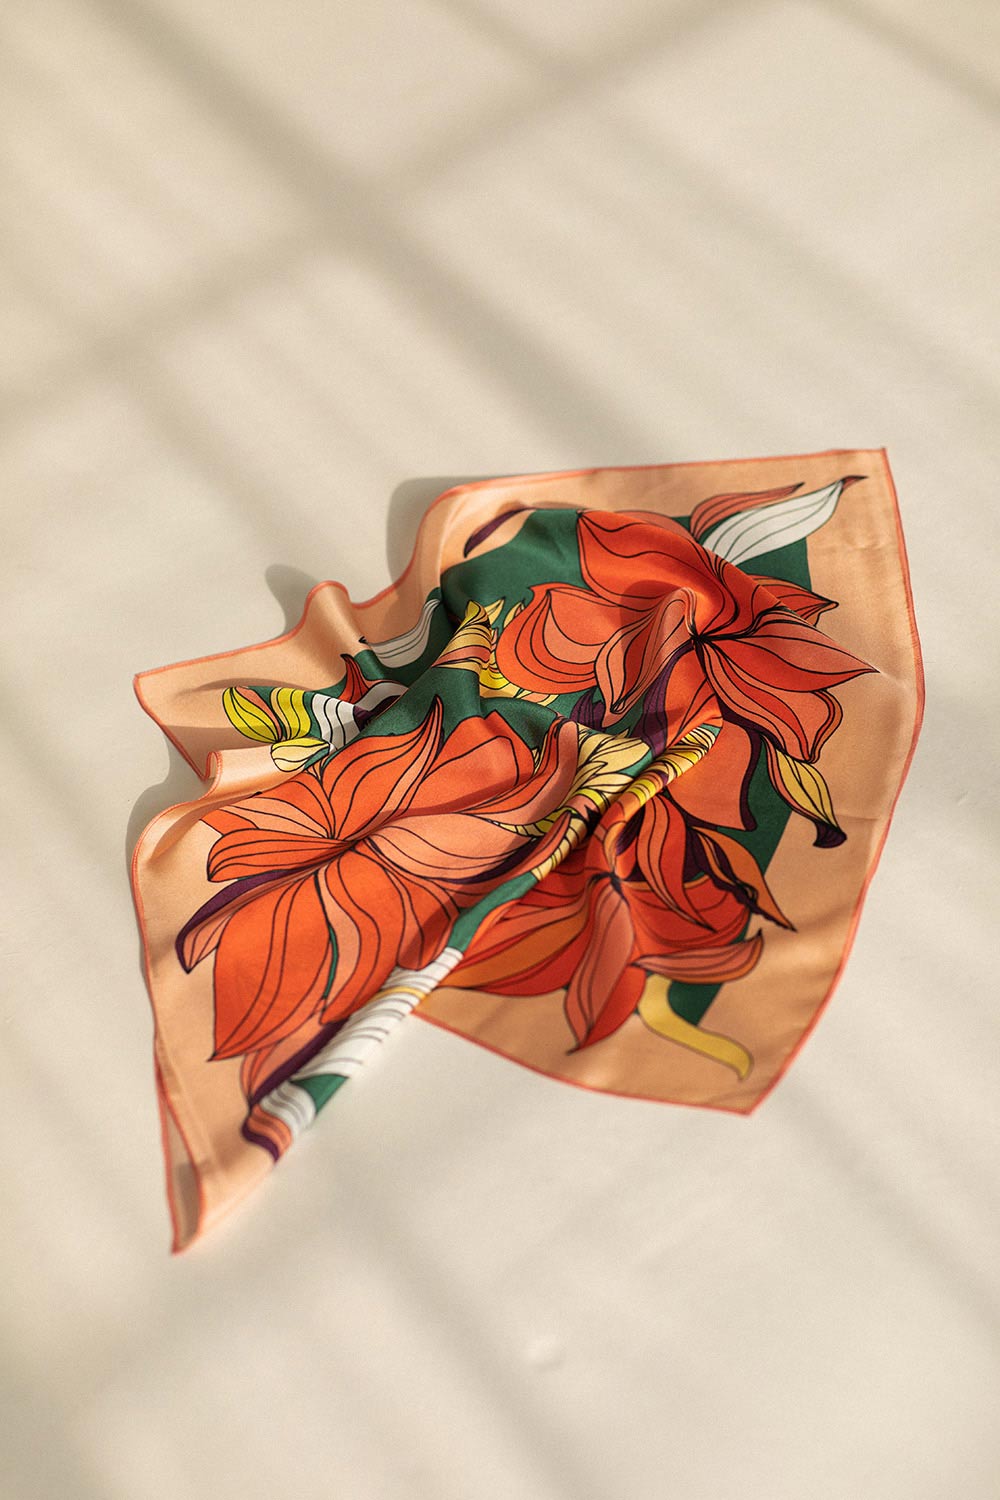 Folded red & green silk scarf with floral pattern & orange border created by Romanian designer Mauverien.